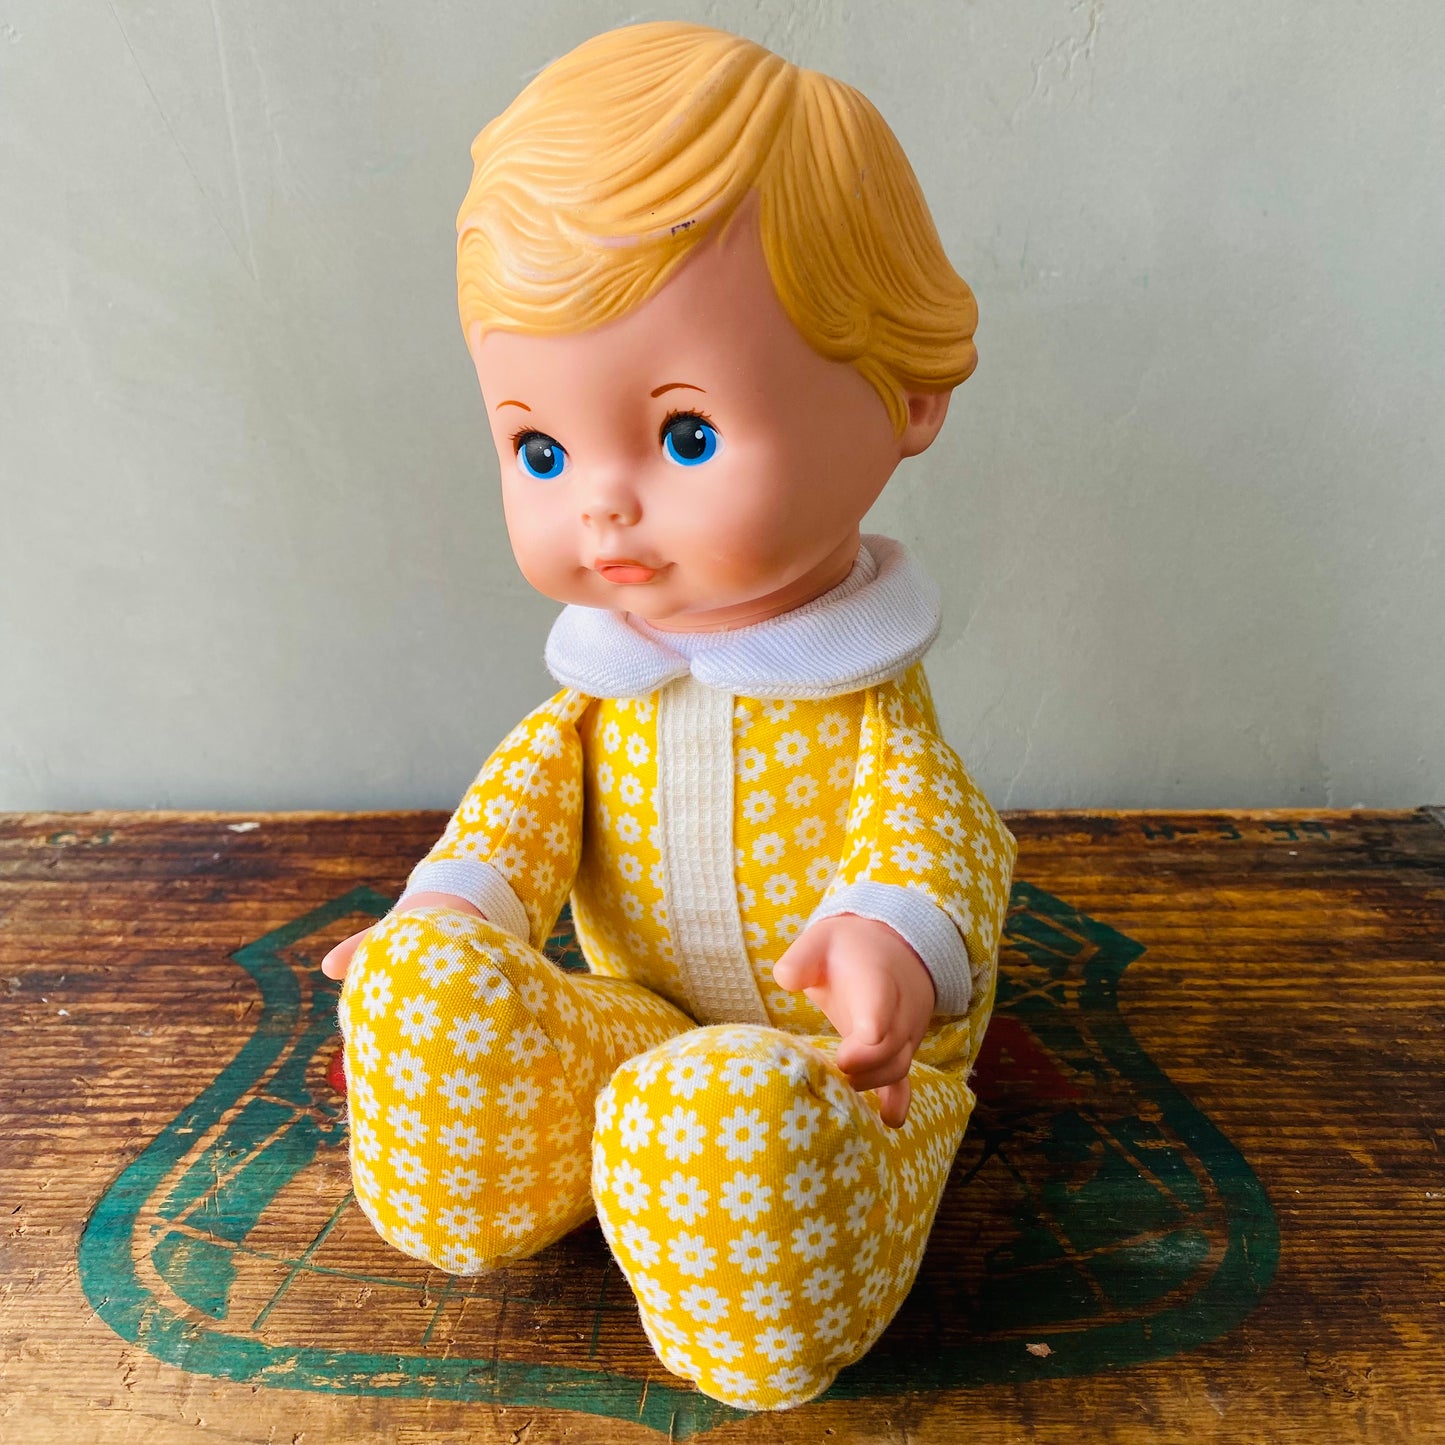 【1975 vintage】 FISHER-PRICE TOYS baby doll